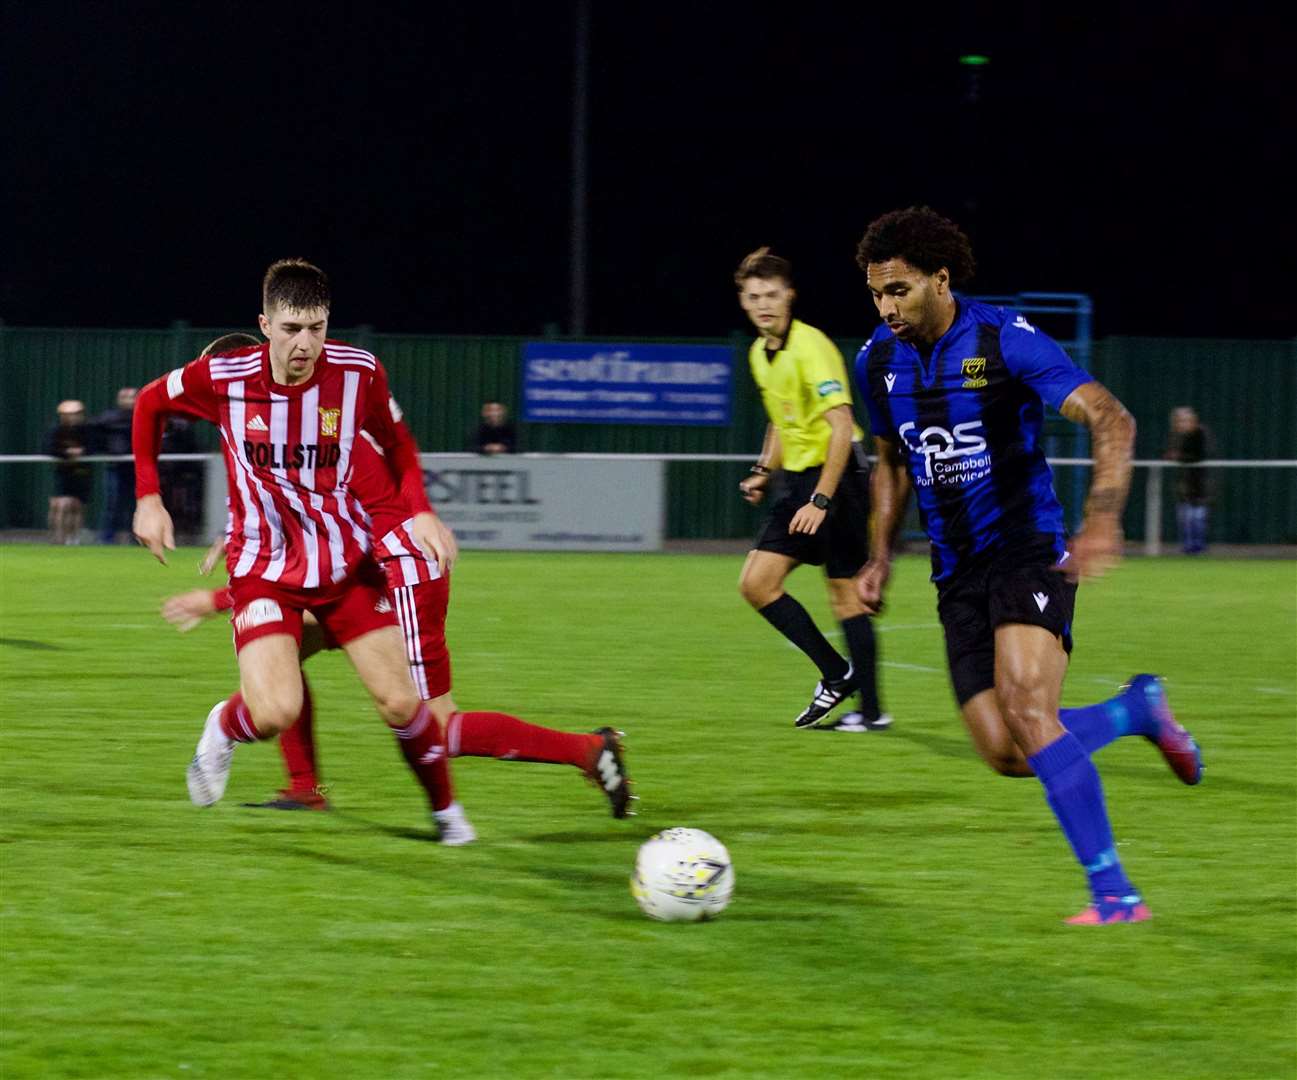 Formartine won over Huntly to progress to the final which takes place at the Haughs, Turriff. Pictre: Phil Harman.